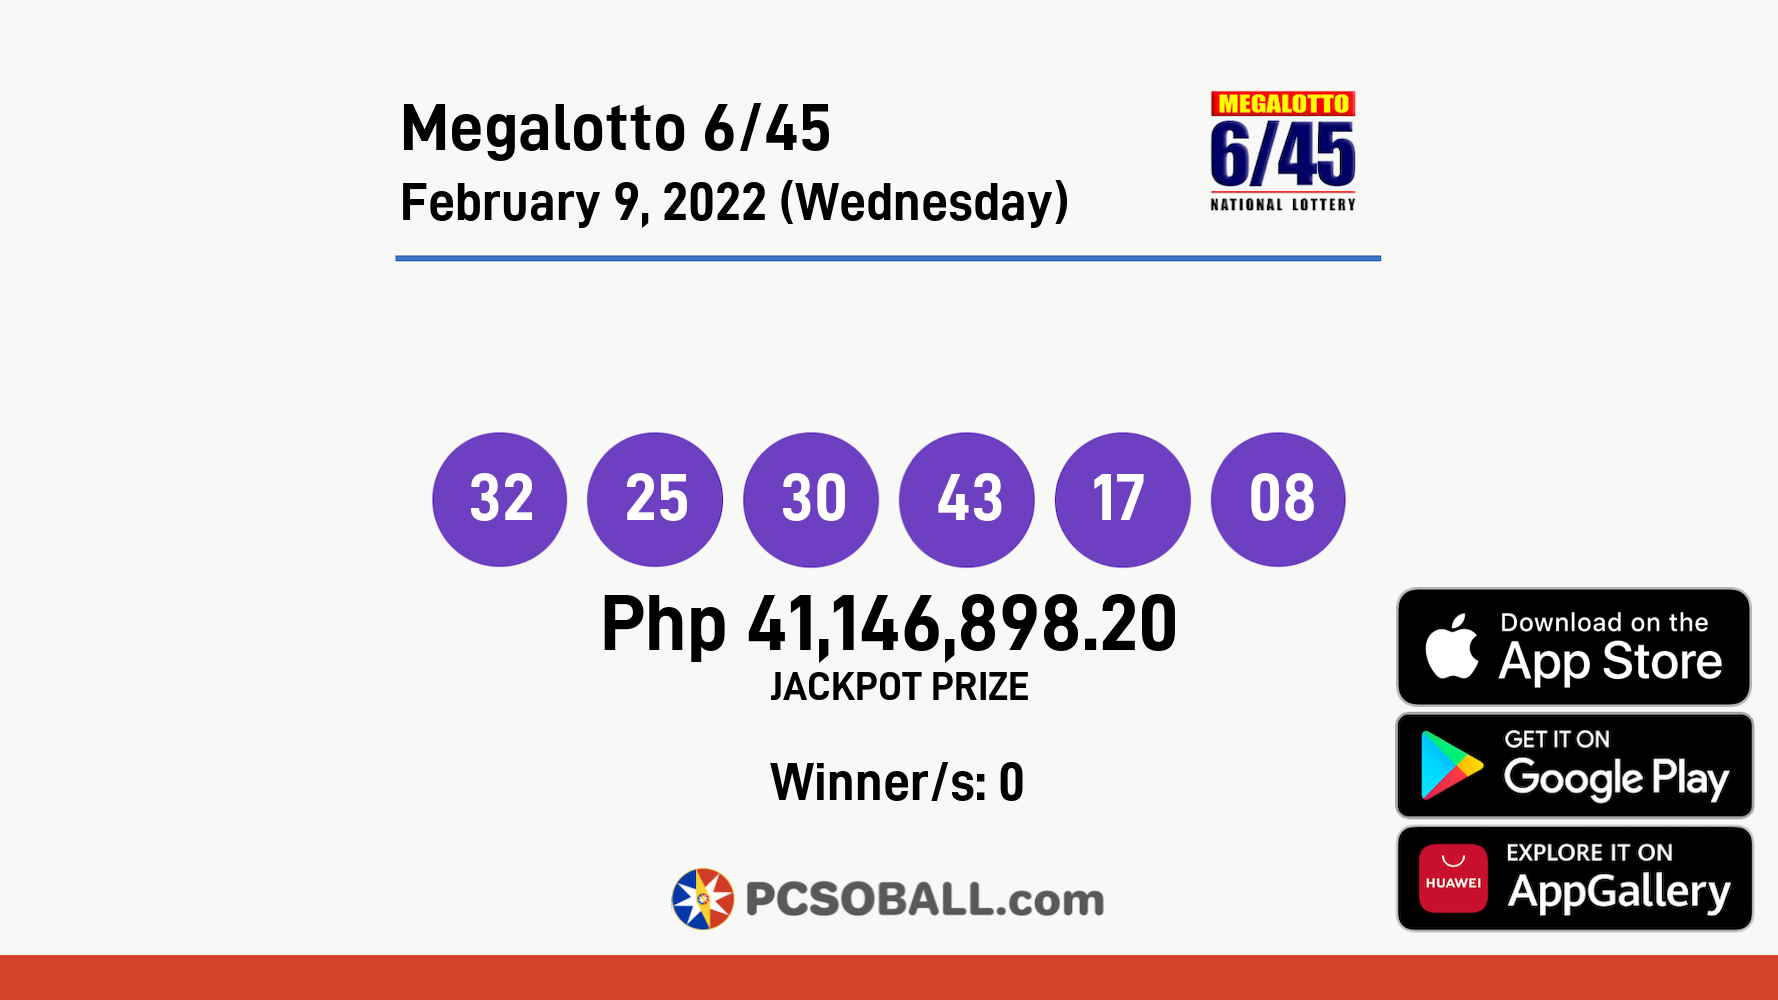 Megalotto 6/45 February 9, 2022 (Wednesday) Result